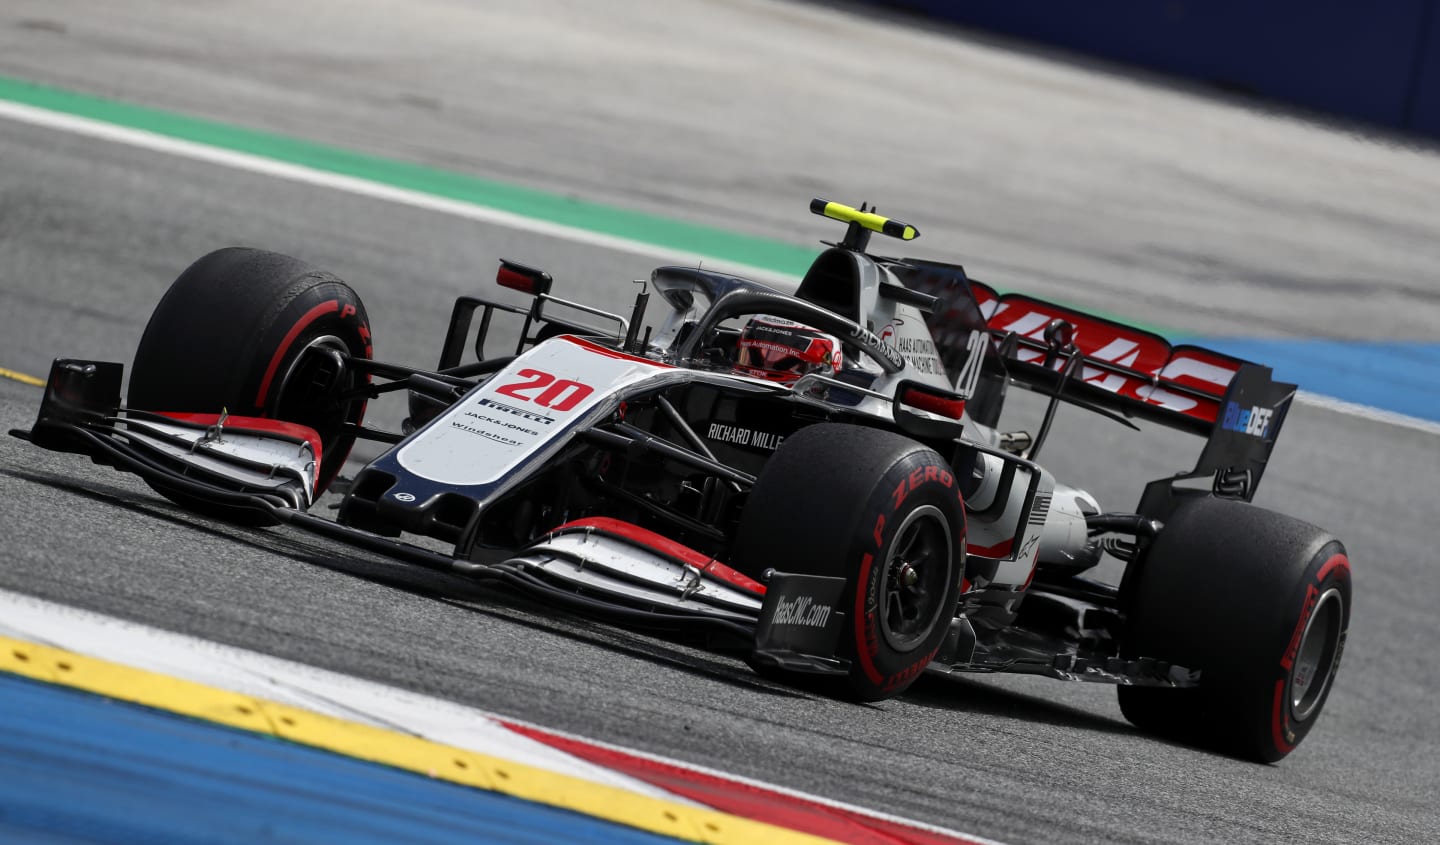 SPIELBERG, AUSTRIA - JULY 12: Kevin Magnussen of Denmark driving the (20) Haas F1 Team VF-20